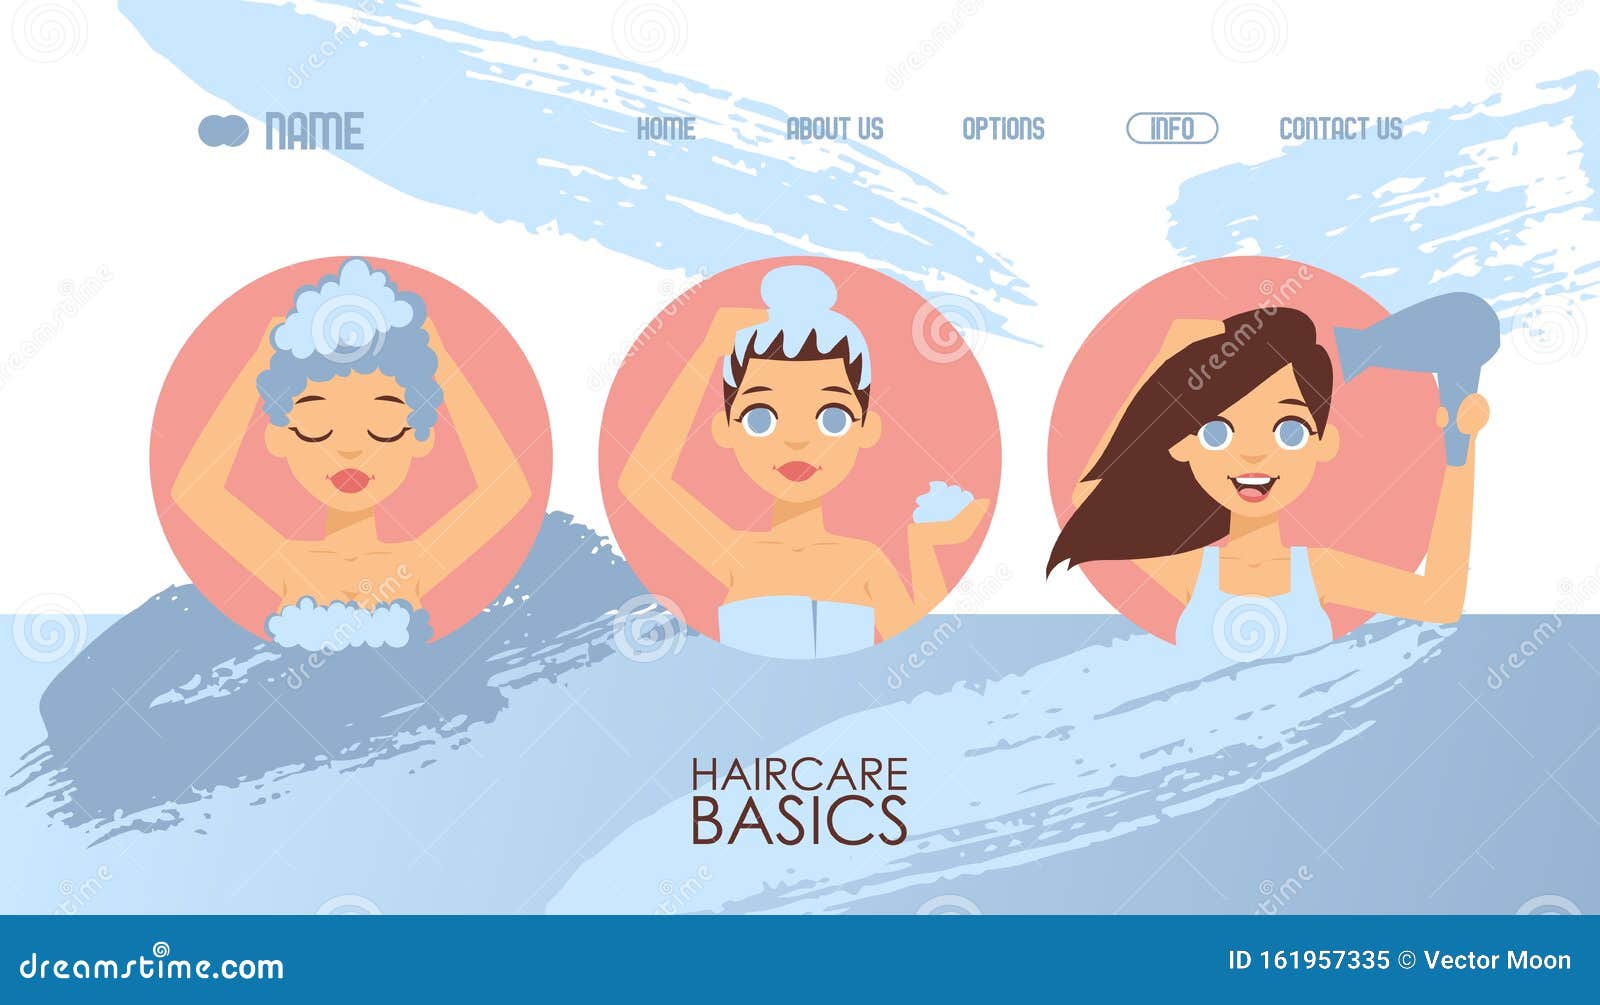 Hair Care Basics, Vector Illustration. Website Template, Haircare Products  Guide, Shampoo and Mask Stock Vector - Illustration of dryer, instruction:  161957335